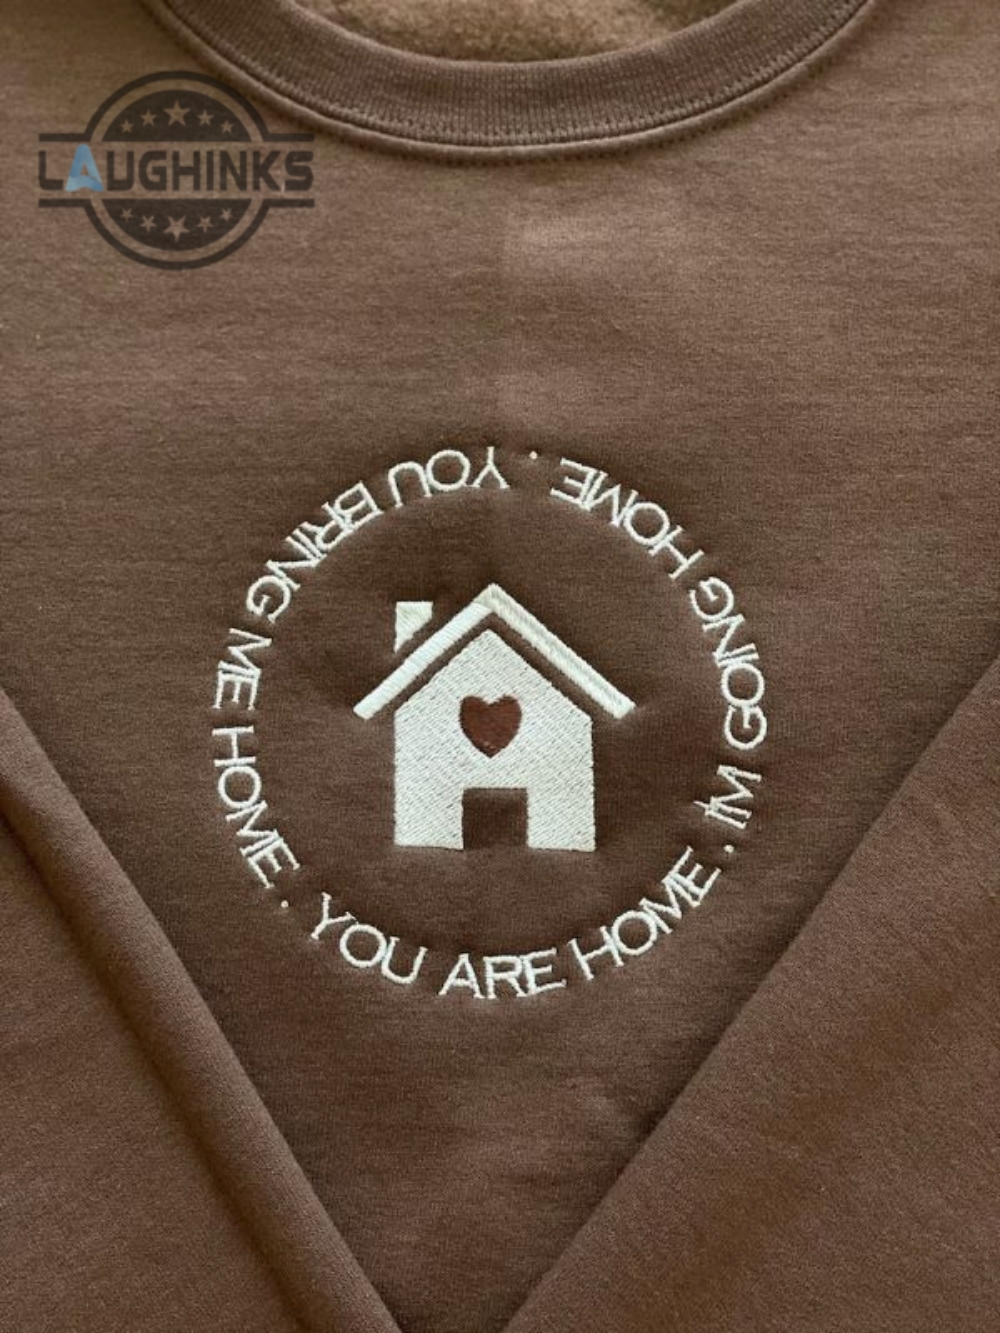 Harry Styles Harrys House Embroidered Sweatshirt You Are Home Embroidery Tshirt Sweatshirt Hoodie Gift